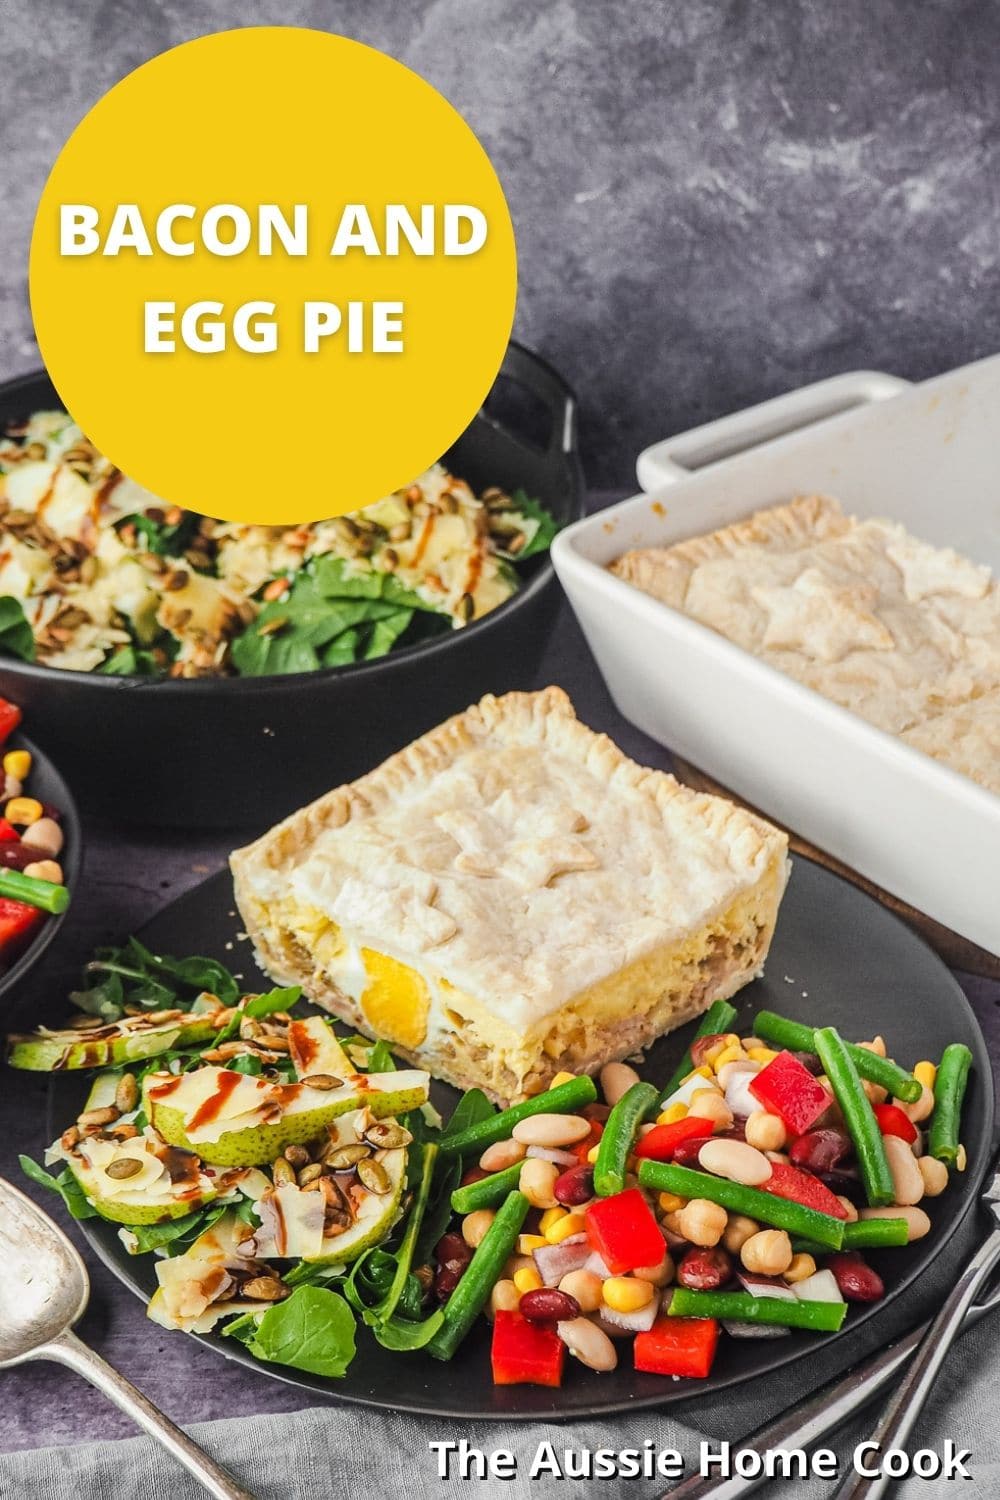 Pie in a plate with salads, with pie dish and salads in background, and text overlay Bacon and Egg Pie and The Aussie Home Cook.